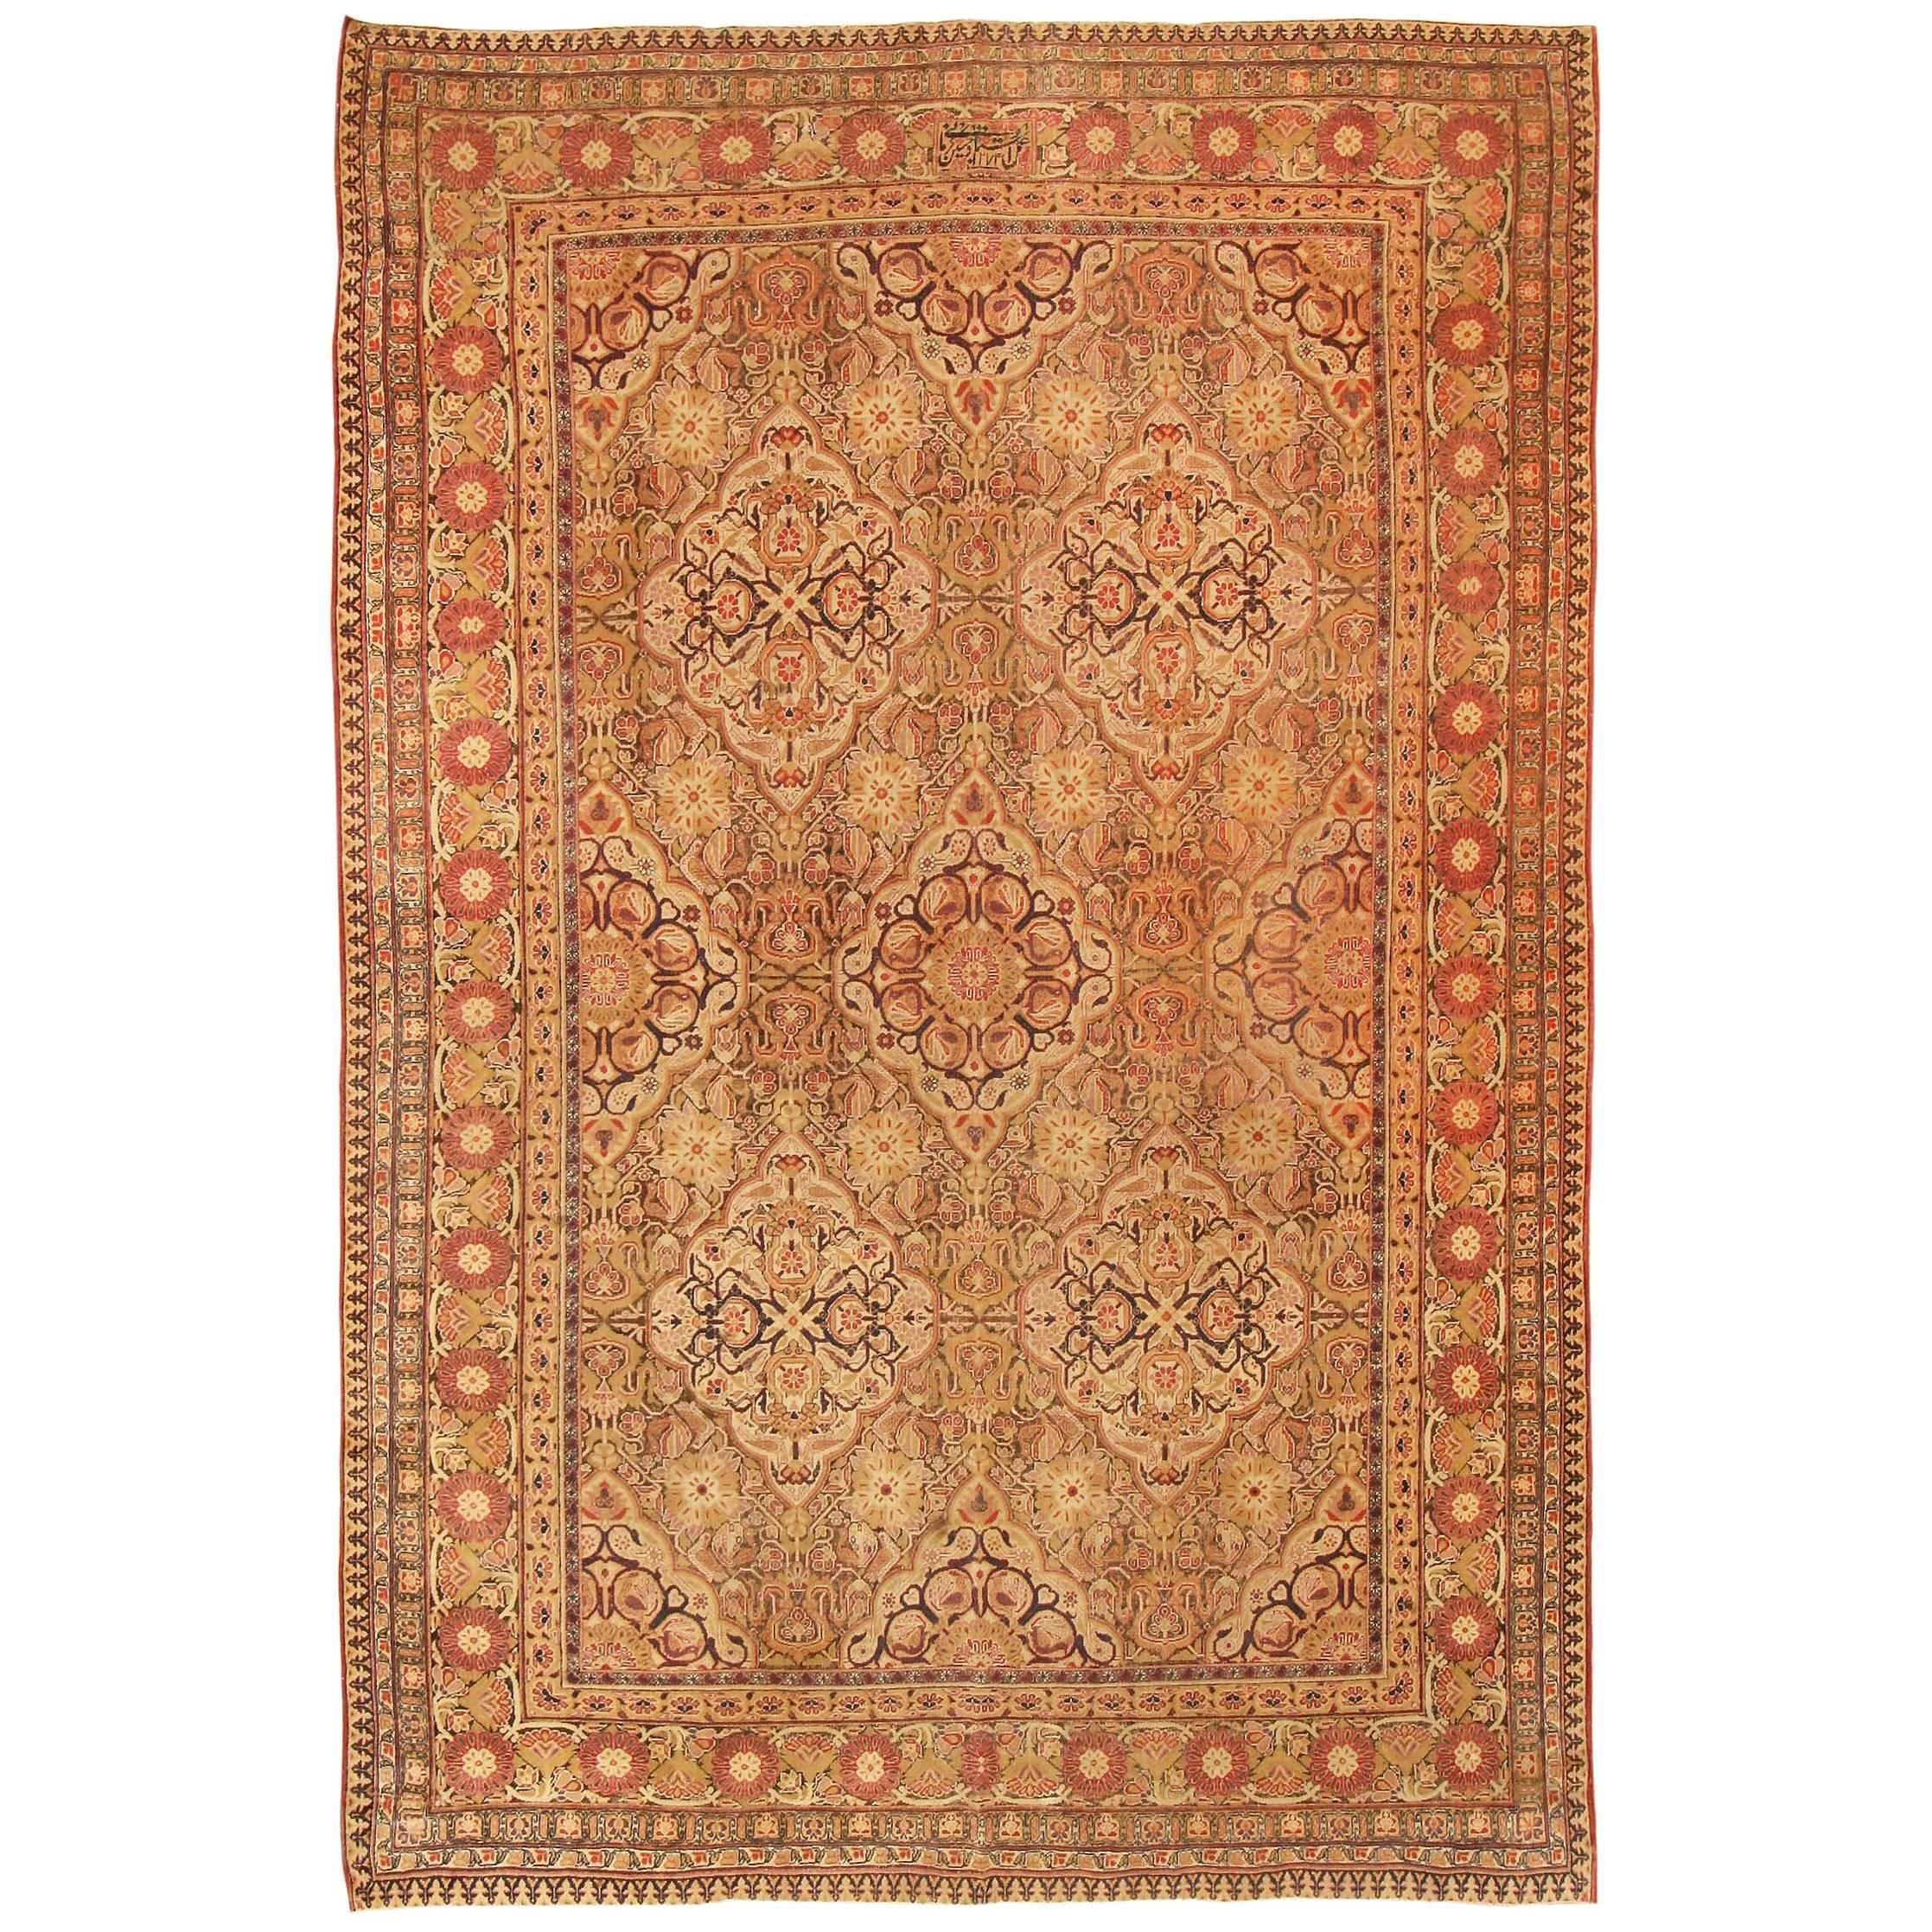 Antique Kerman Persian Rug. Size: 8 ft 9 in x 13 ft 1 in (2.67 m x 3.99 m)